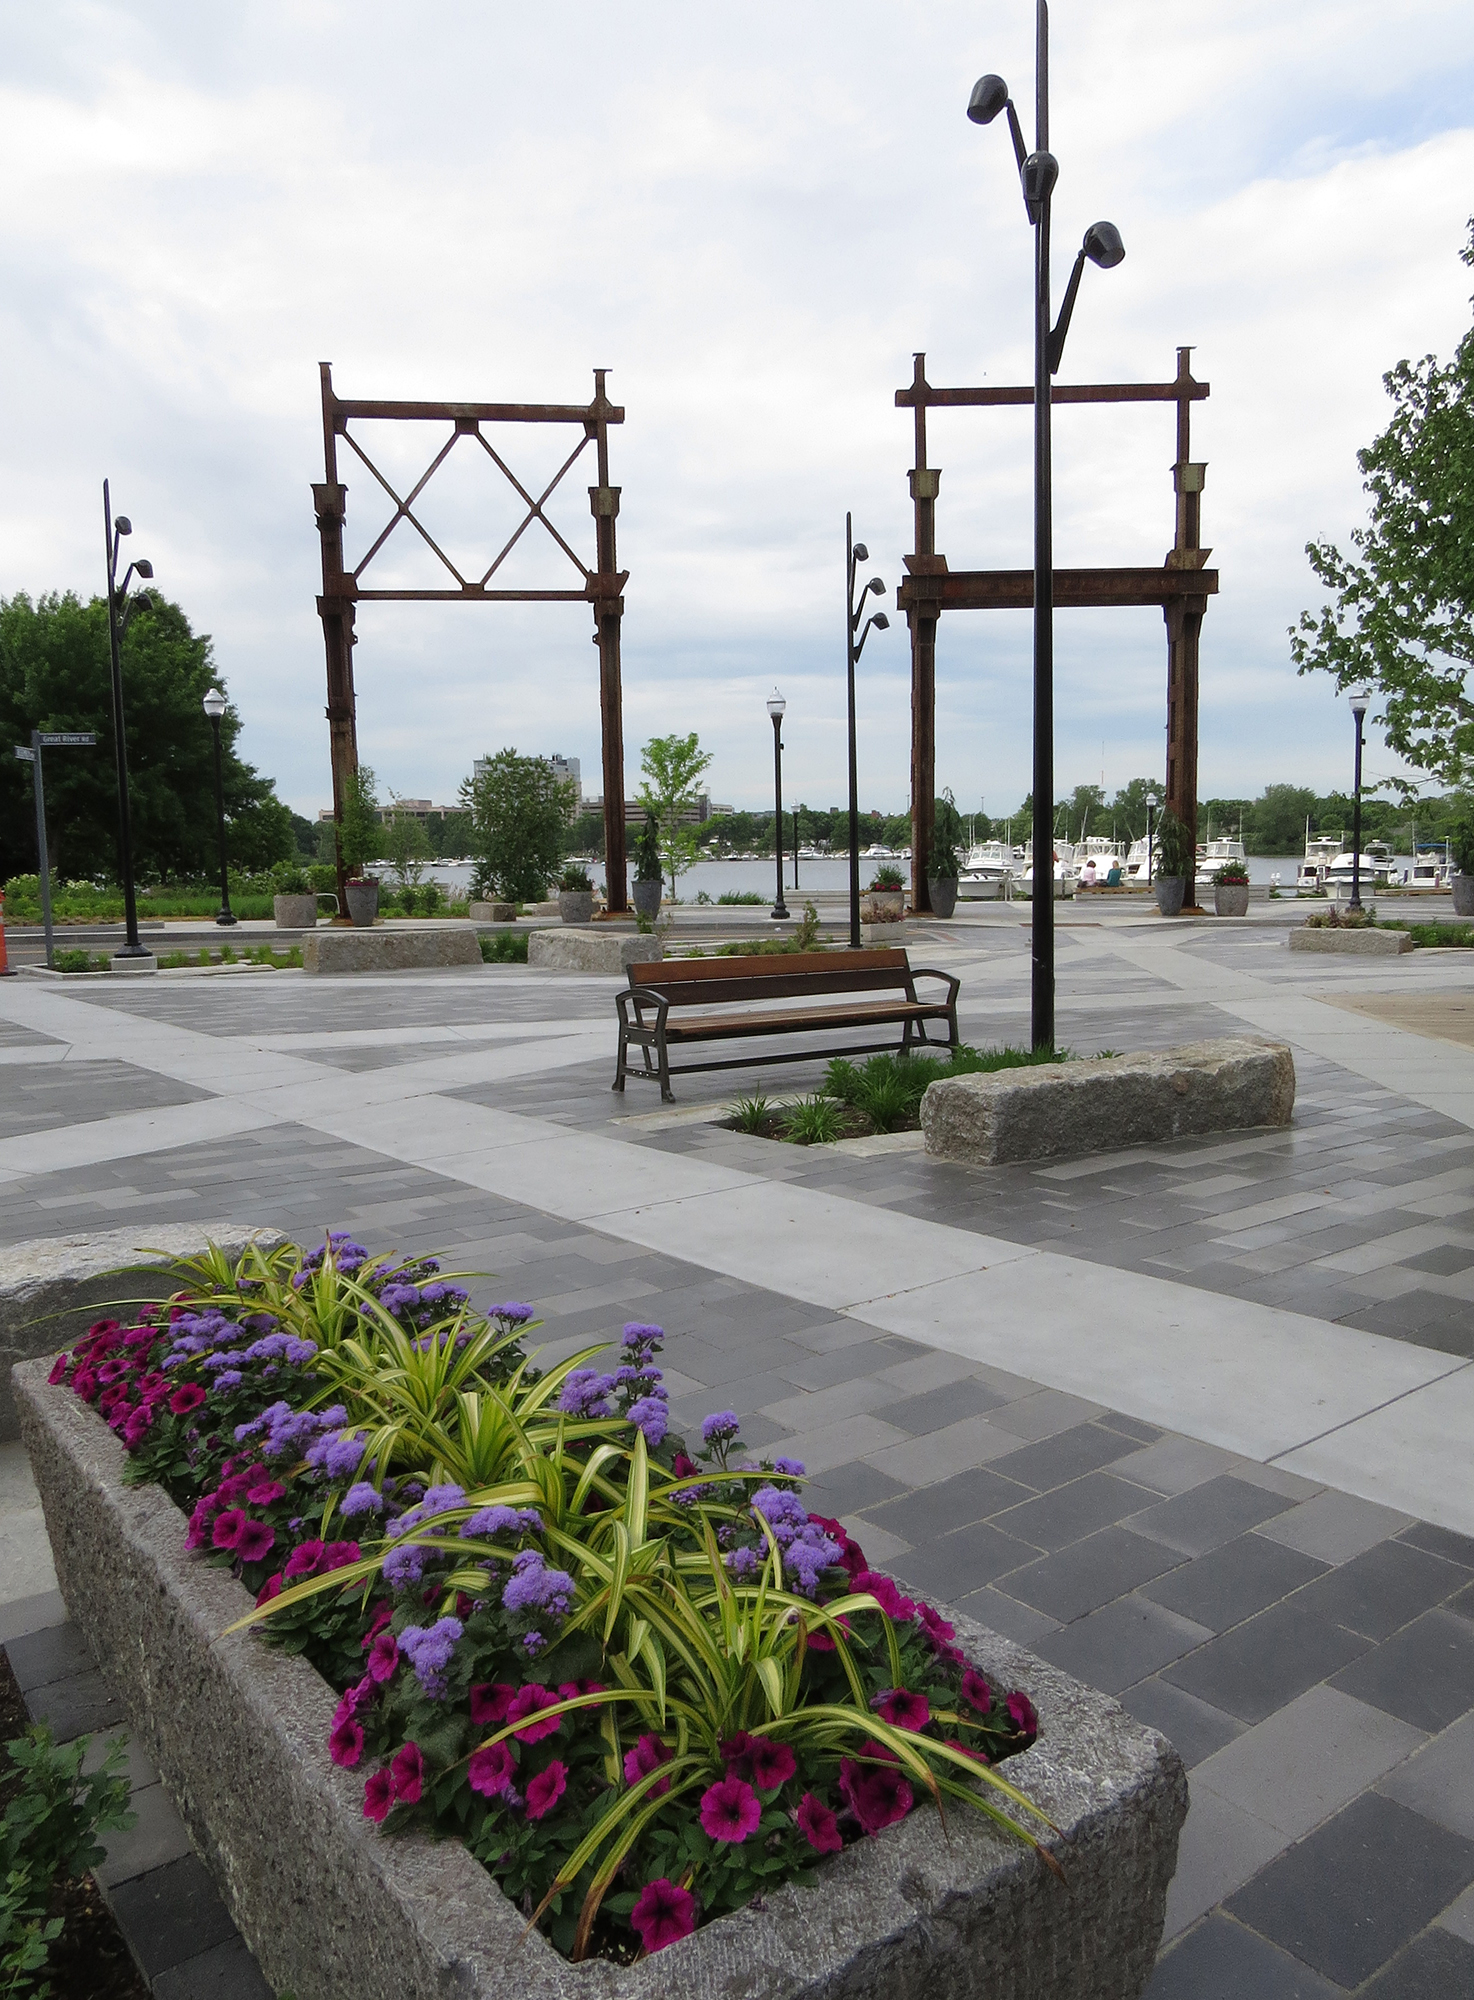 A raised garden with flowers is at the forefront of a waterfront park with unique paving patterns in Senzo pavers and poured concrete.